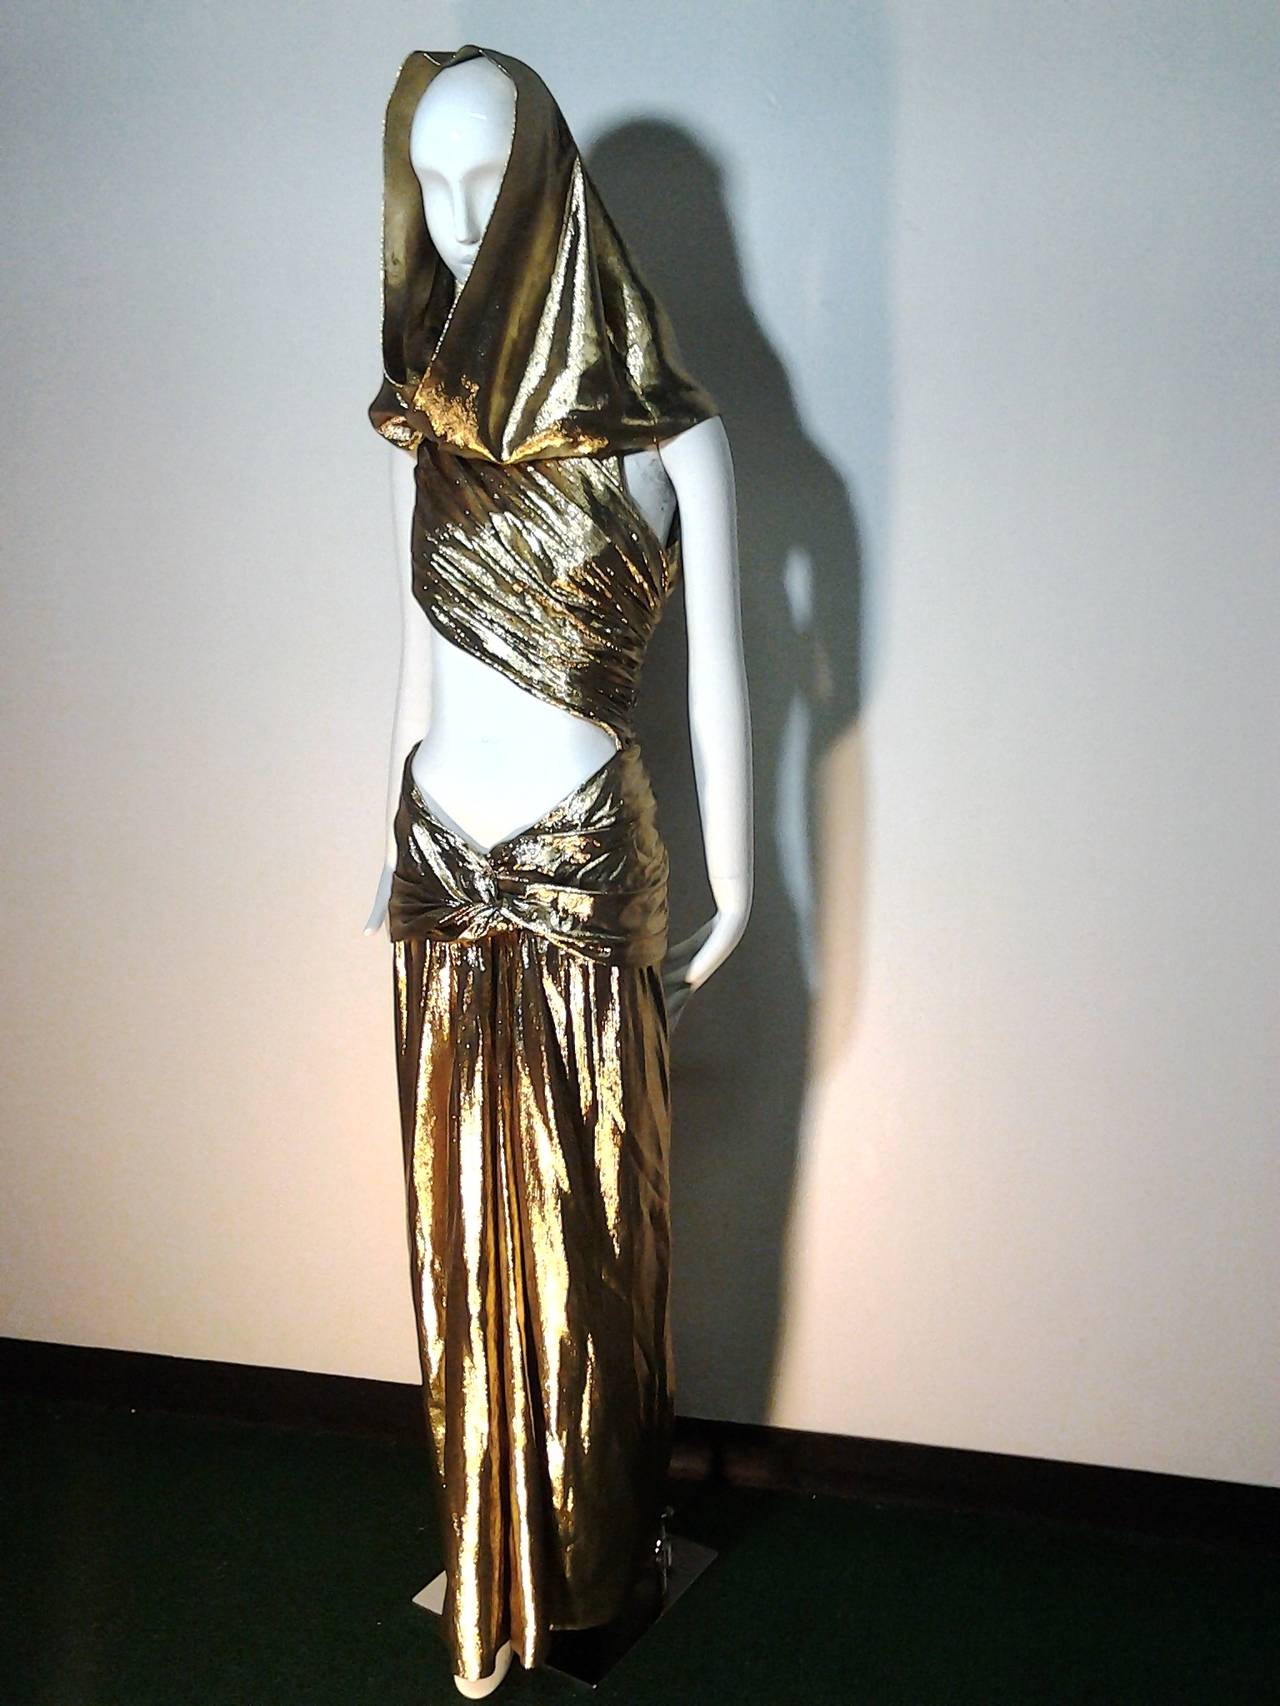 Iconic Yves Saint Laurent, Long evening dress, with 90's waist cut-out and draping.
Rive Gauche collection, Fall-Winter 1991.
Draped gold lamé with hood and daring cut-out midriff.

In the permanent collection of the Denver Art Museum. Featured in